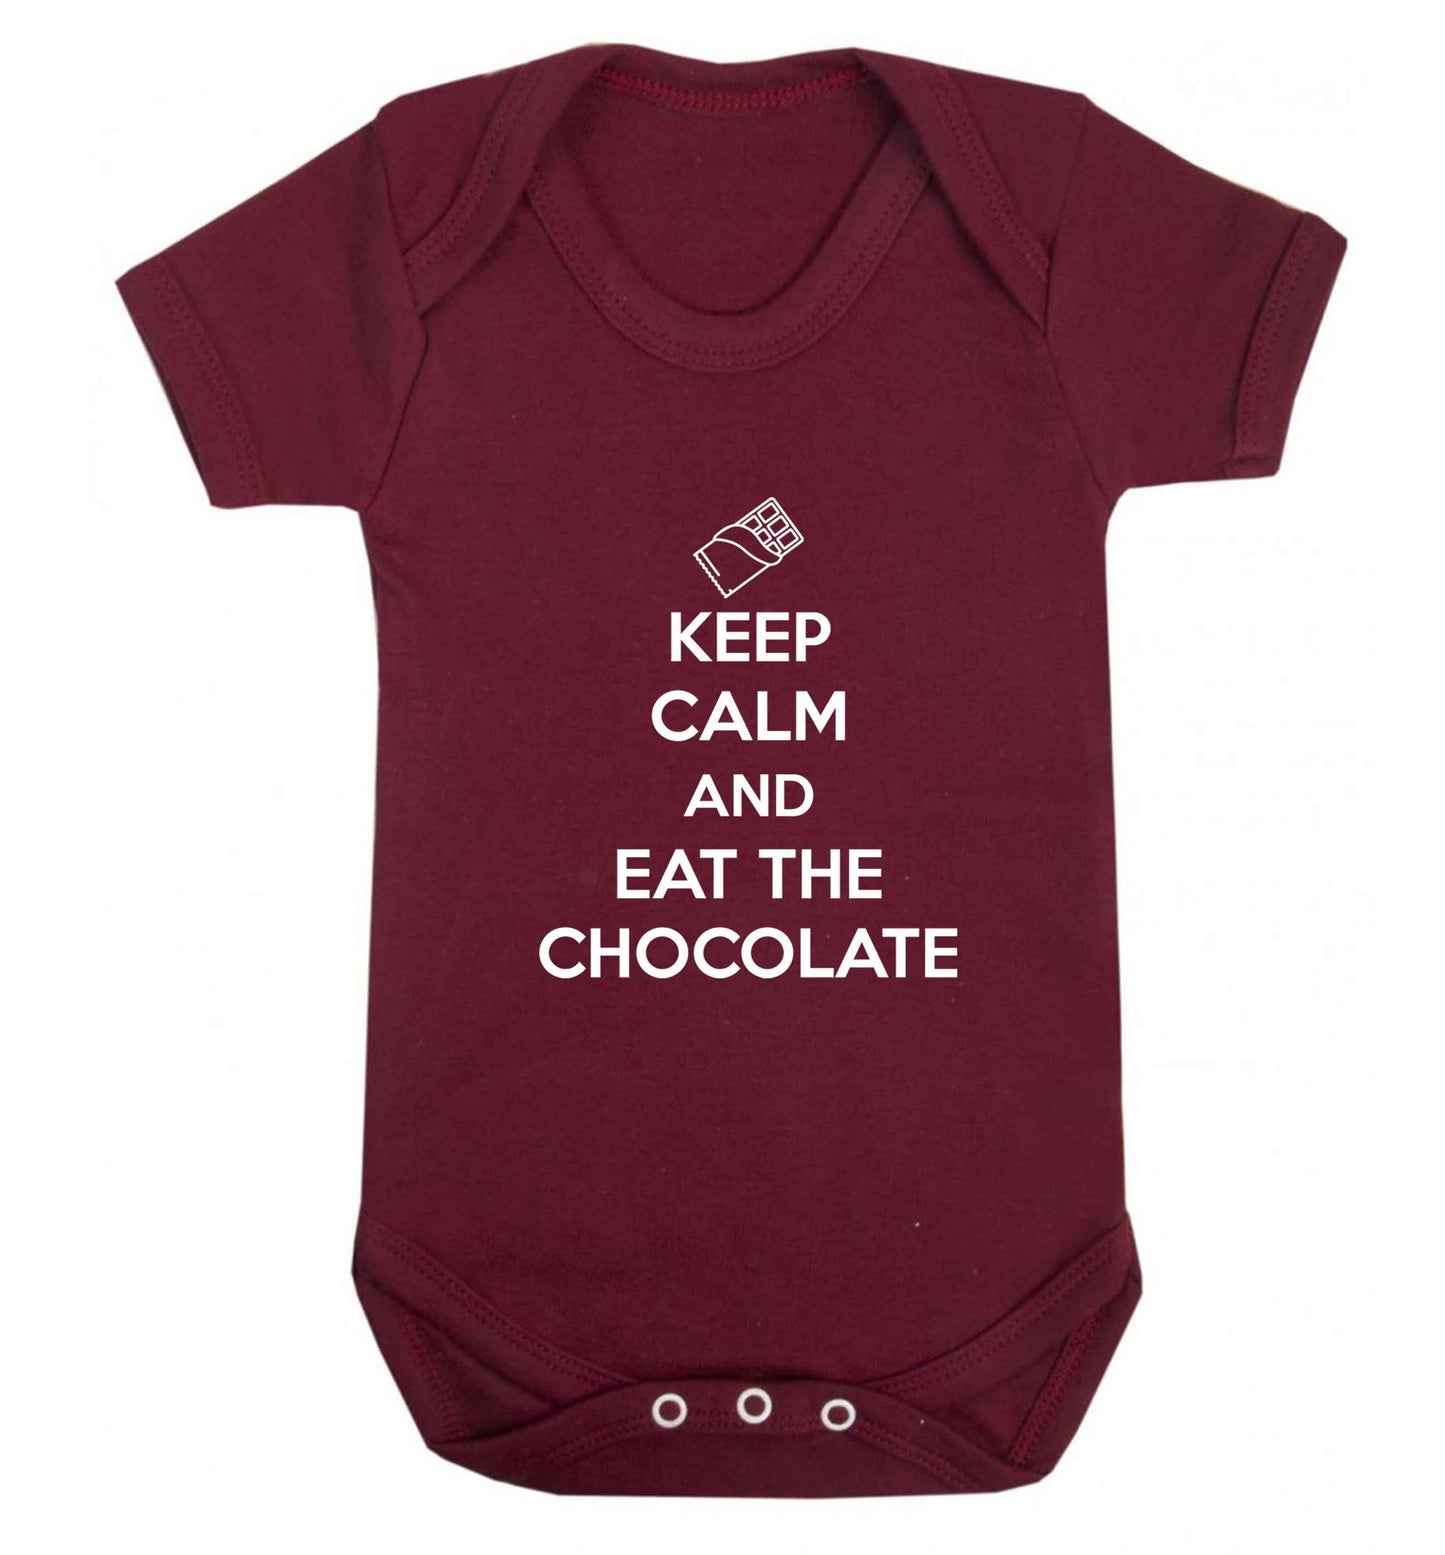 funny gift for a chocaholic! Keep calm and eat the chocolate baby vest maroon 18-24 months